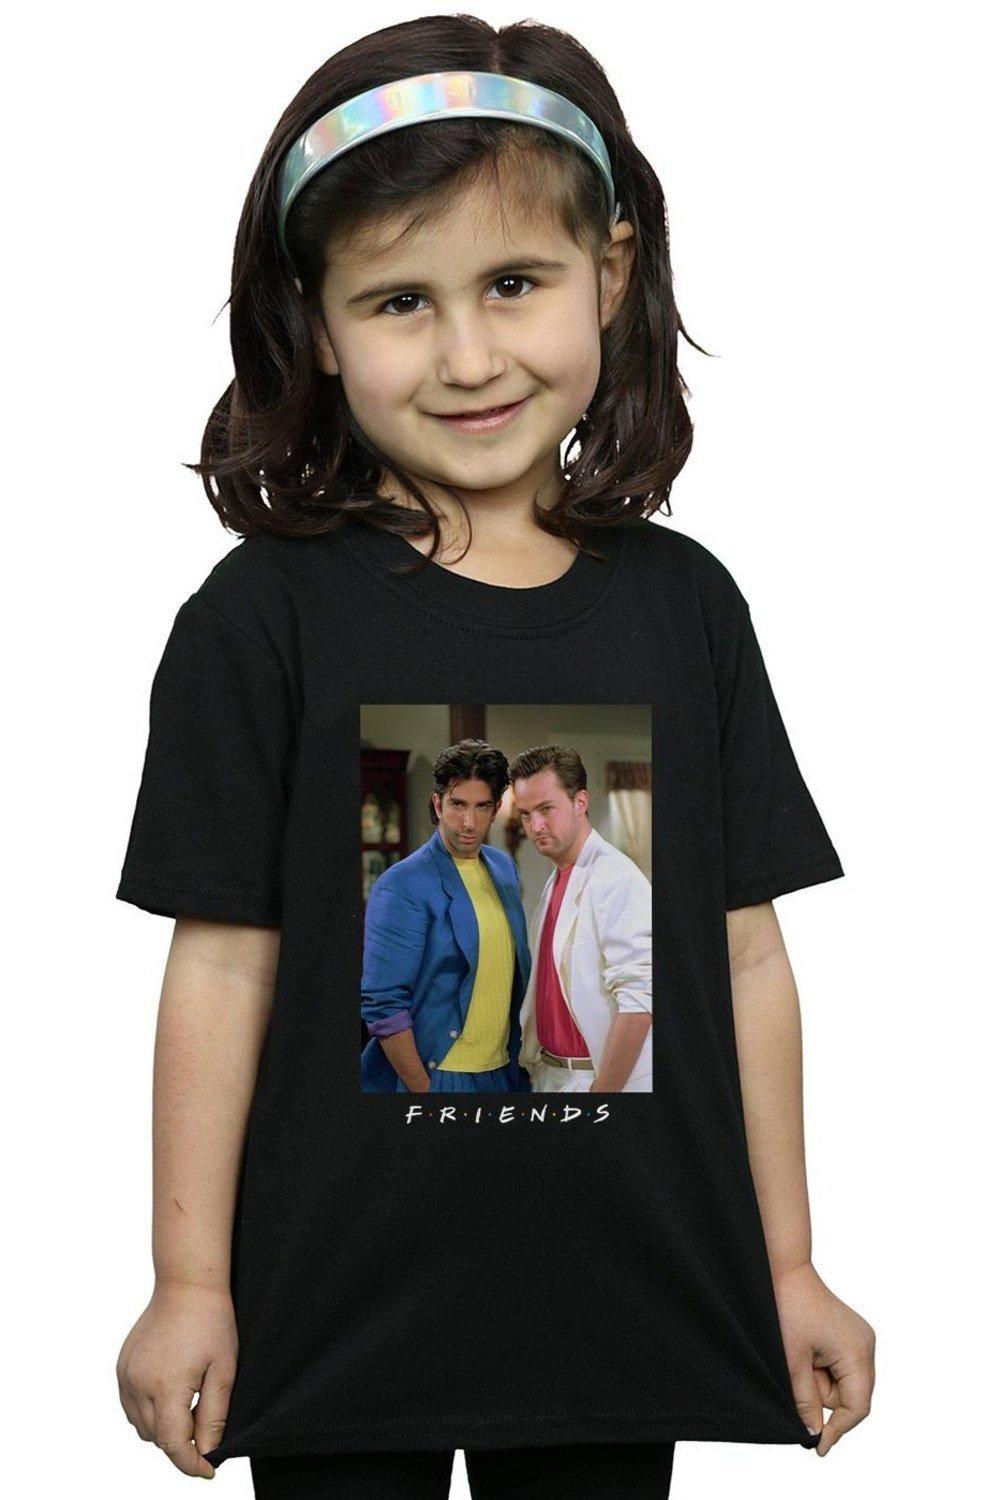 Ross And Chandler College Cotton T-Shirt